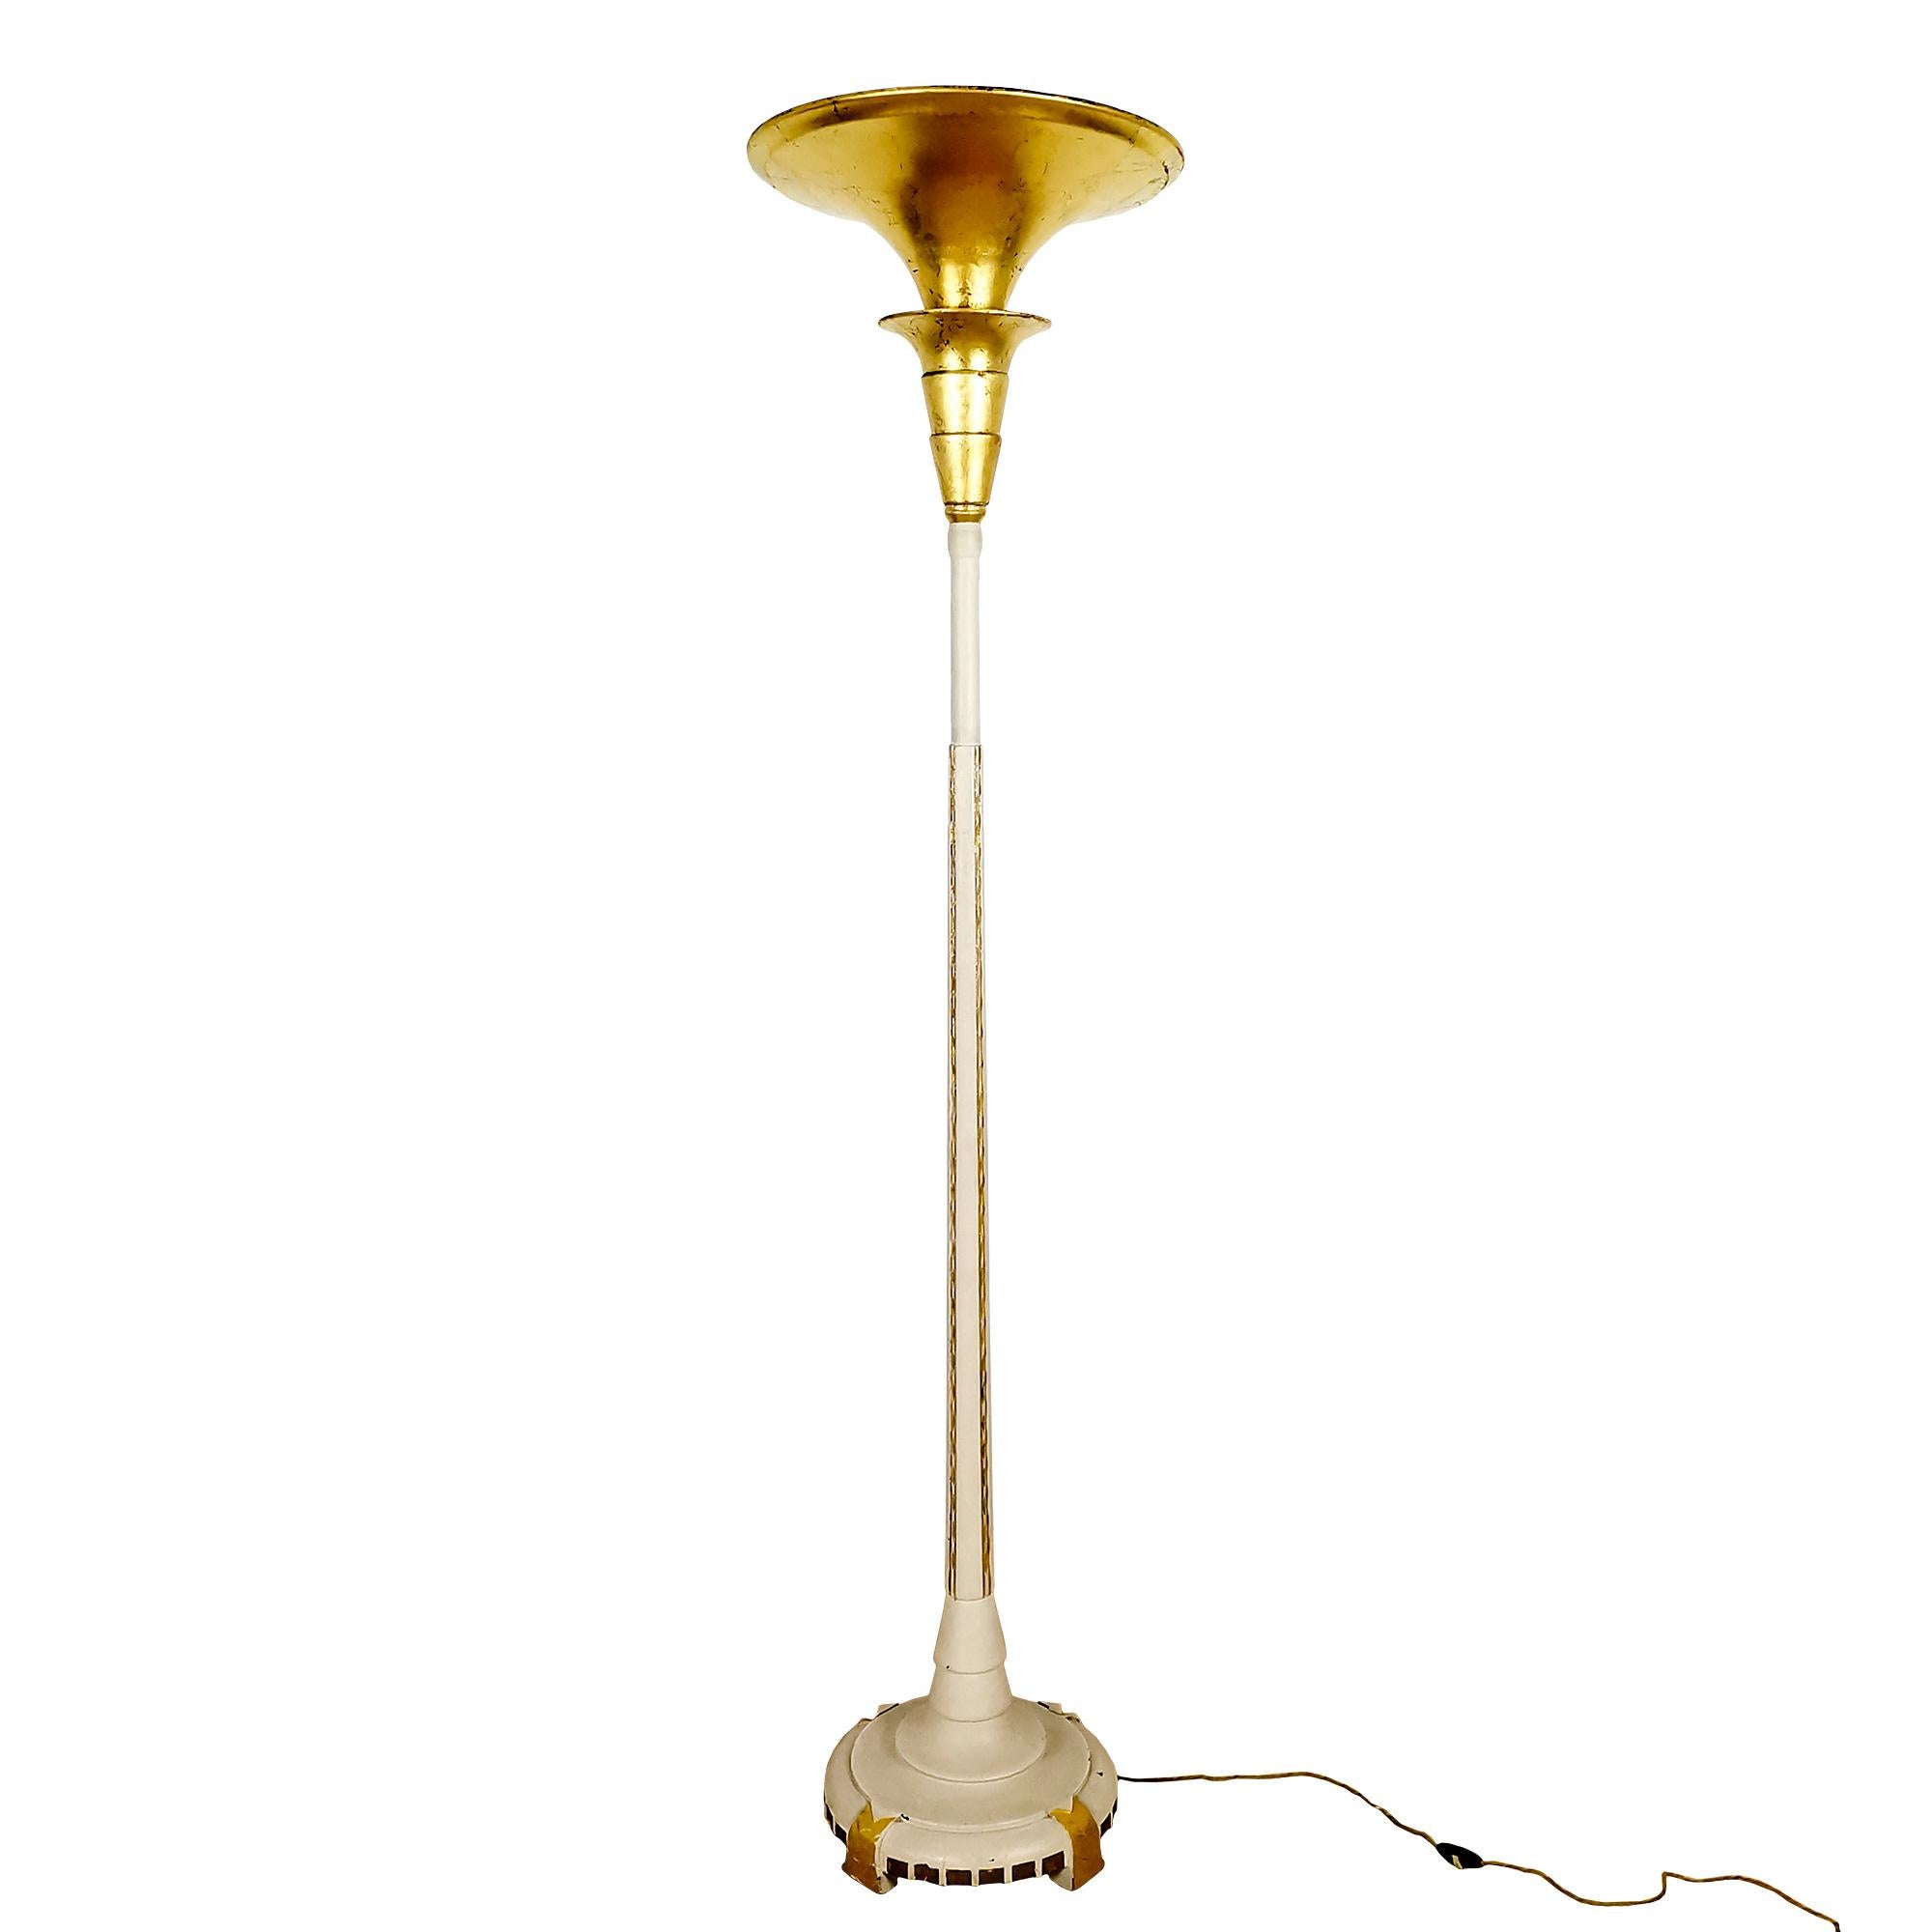 Floor lamp in turned and carved solid wood with ivory lacquered geometric patterns and golden details. Upper part in gold leaf. Indirect light.
Belgium c. 1925.

Dimensions:
cm Diam base 37 – top 43 x heigh 185
inches Diam base 14.56 – top 16.92 x